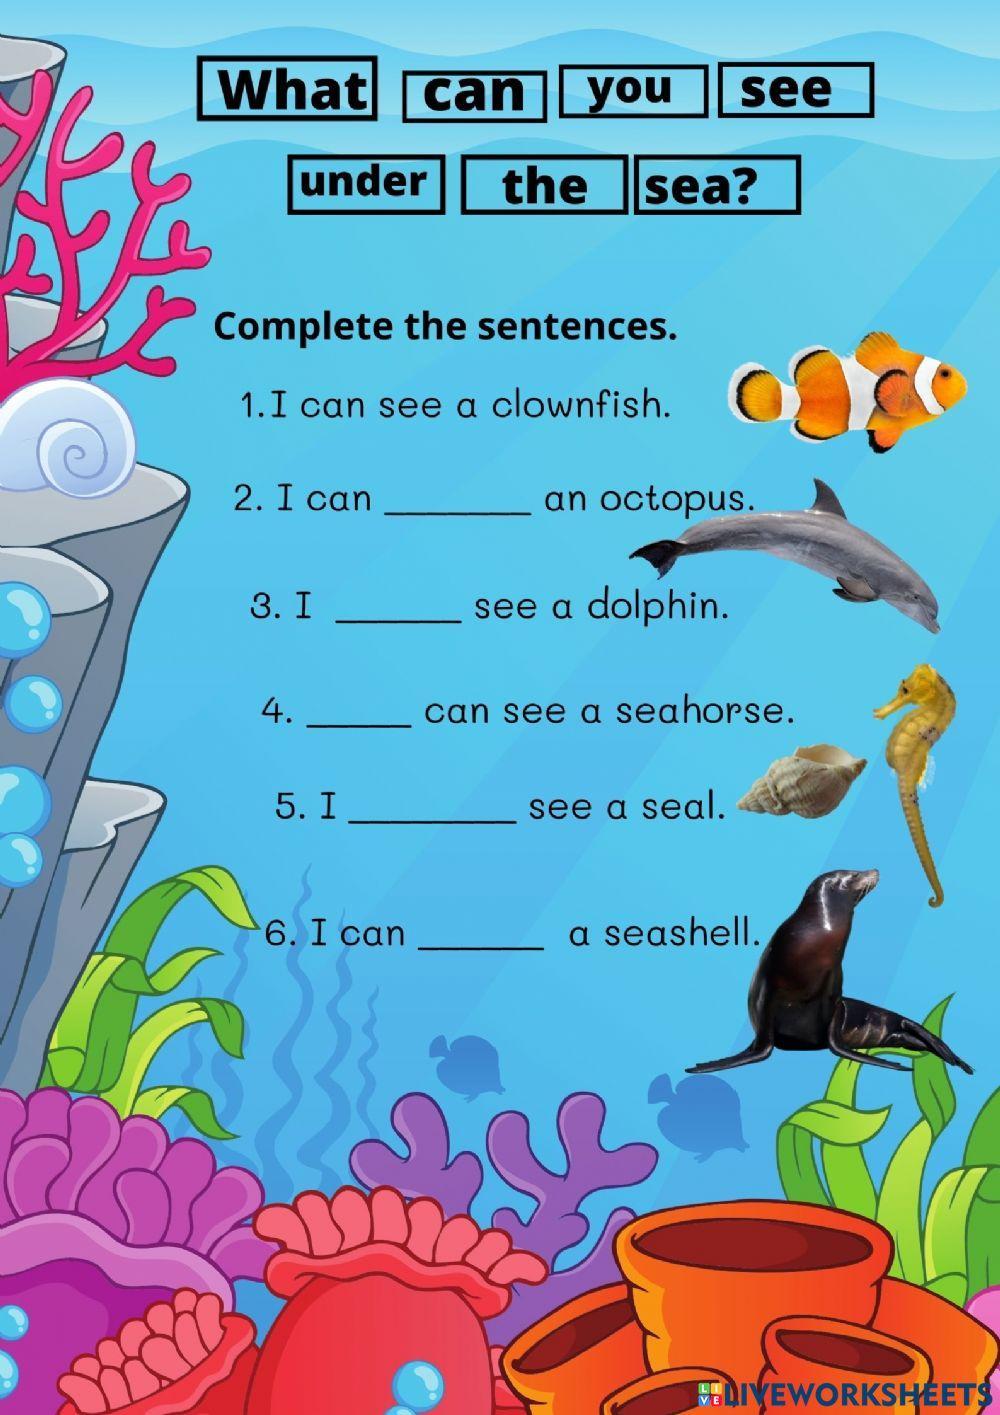 What can you see under the sea?